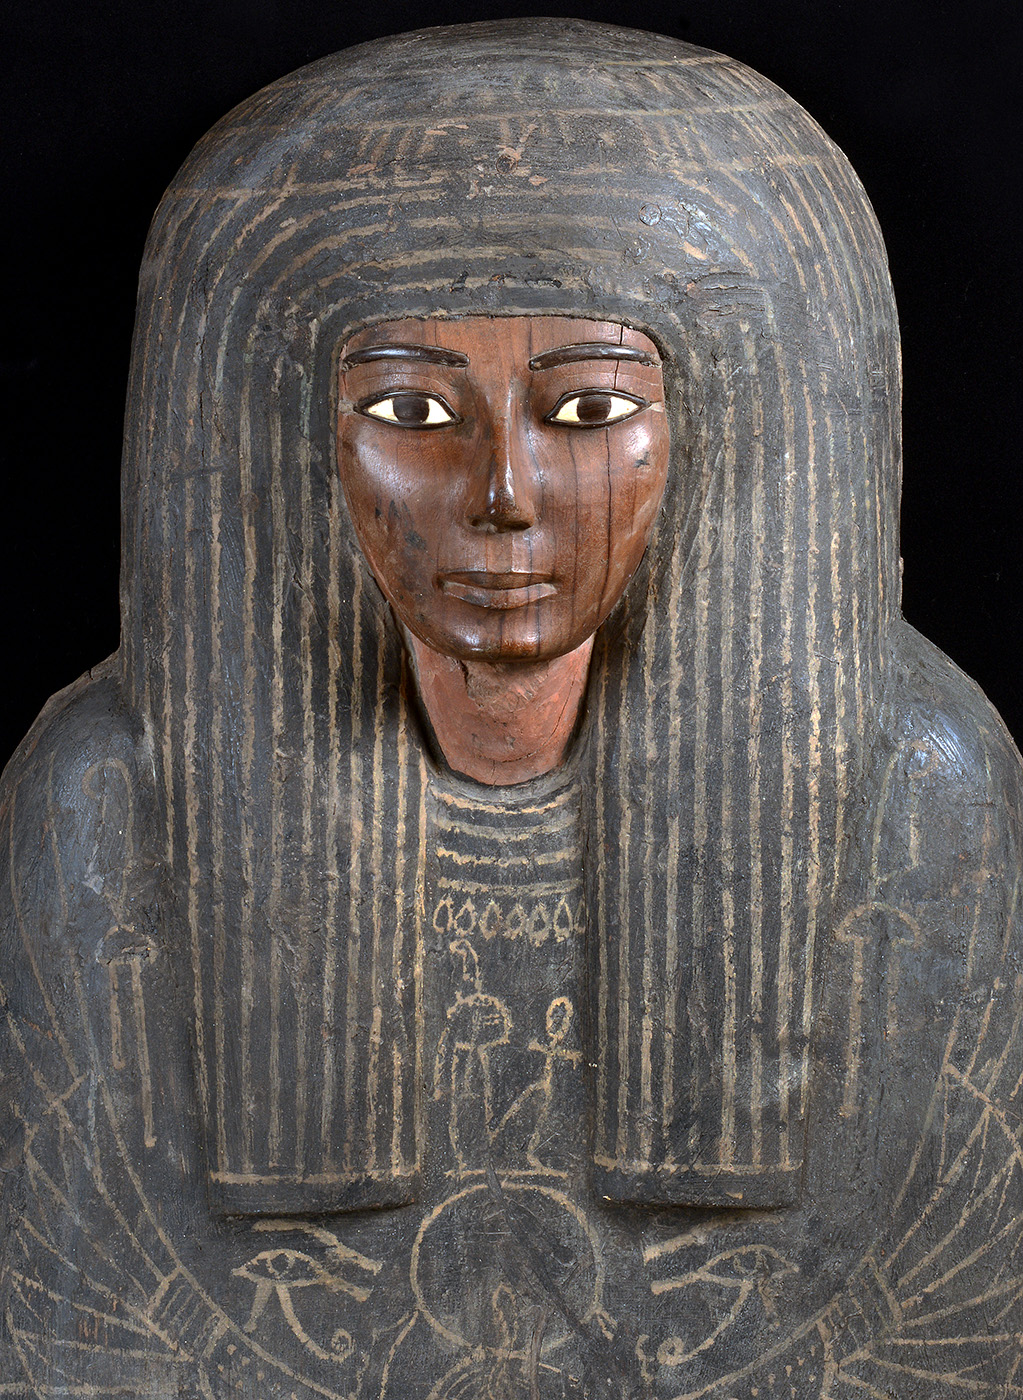 Top part of a coffin shaped in female form, with facial details painted on and various hieroglyphics painted on the chest and shoulders. - click to view larger image